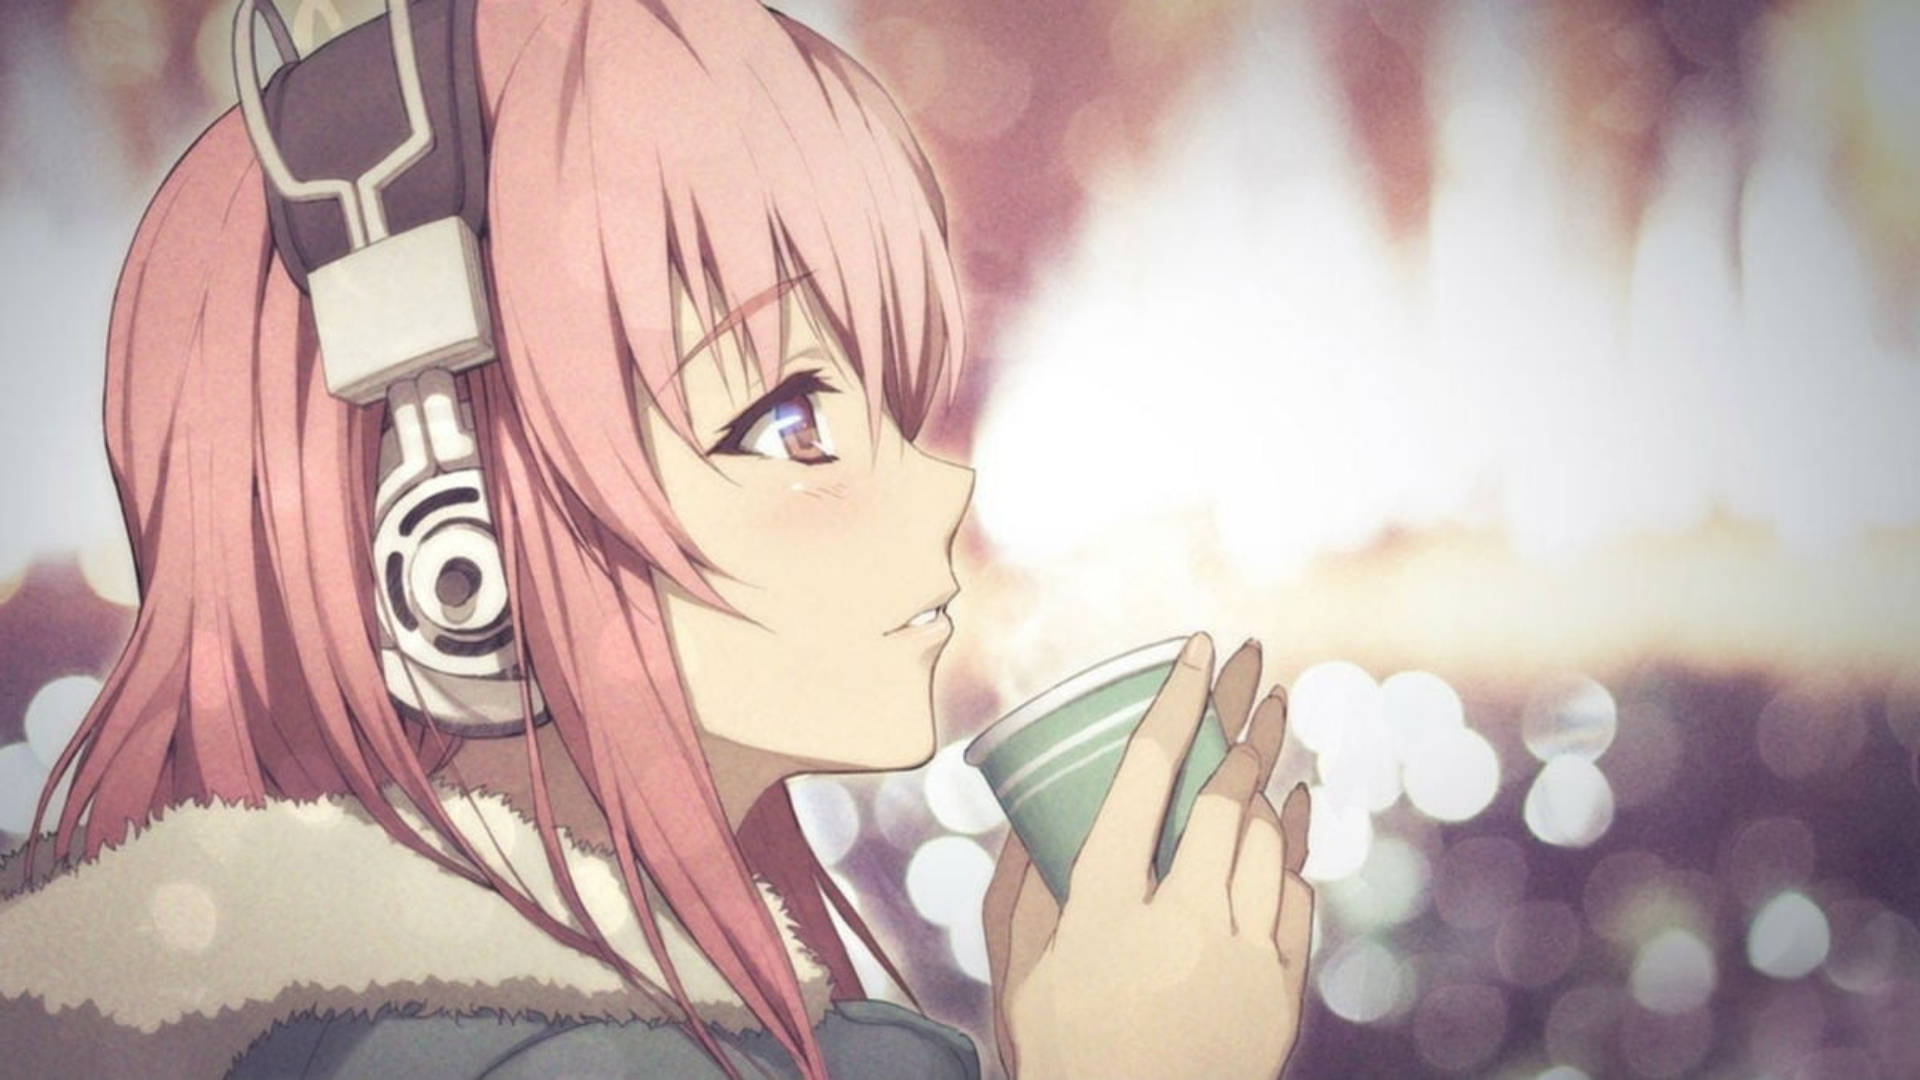 Anime Cute Girl With Pink Hair